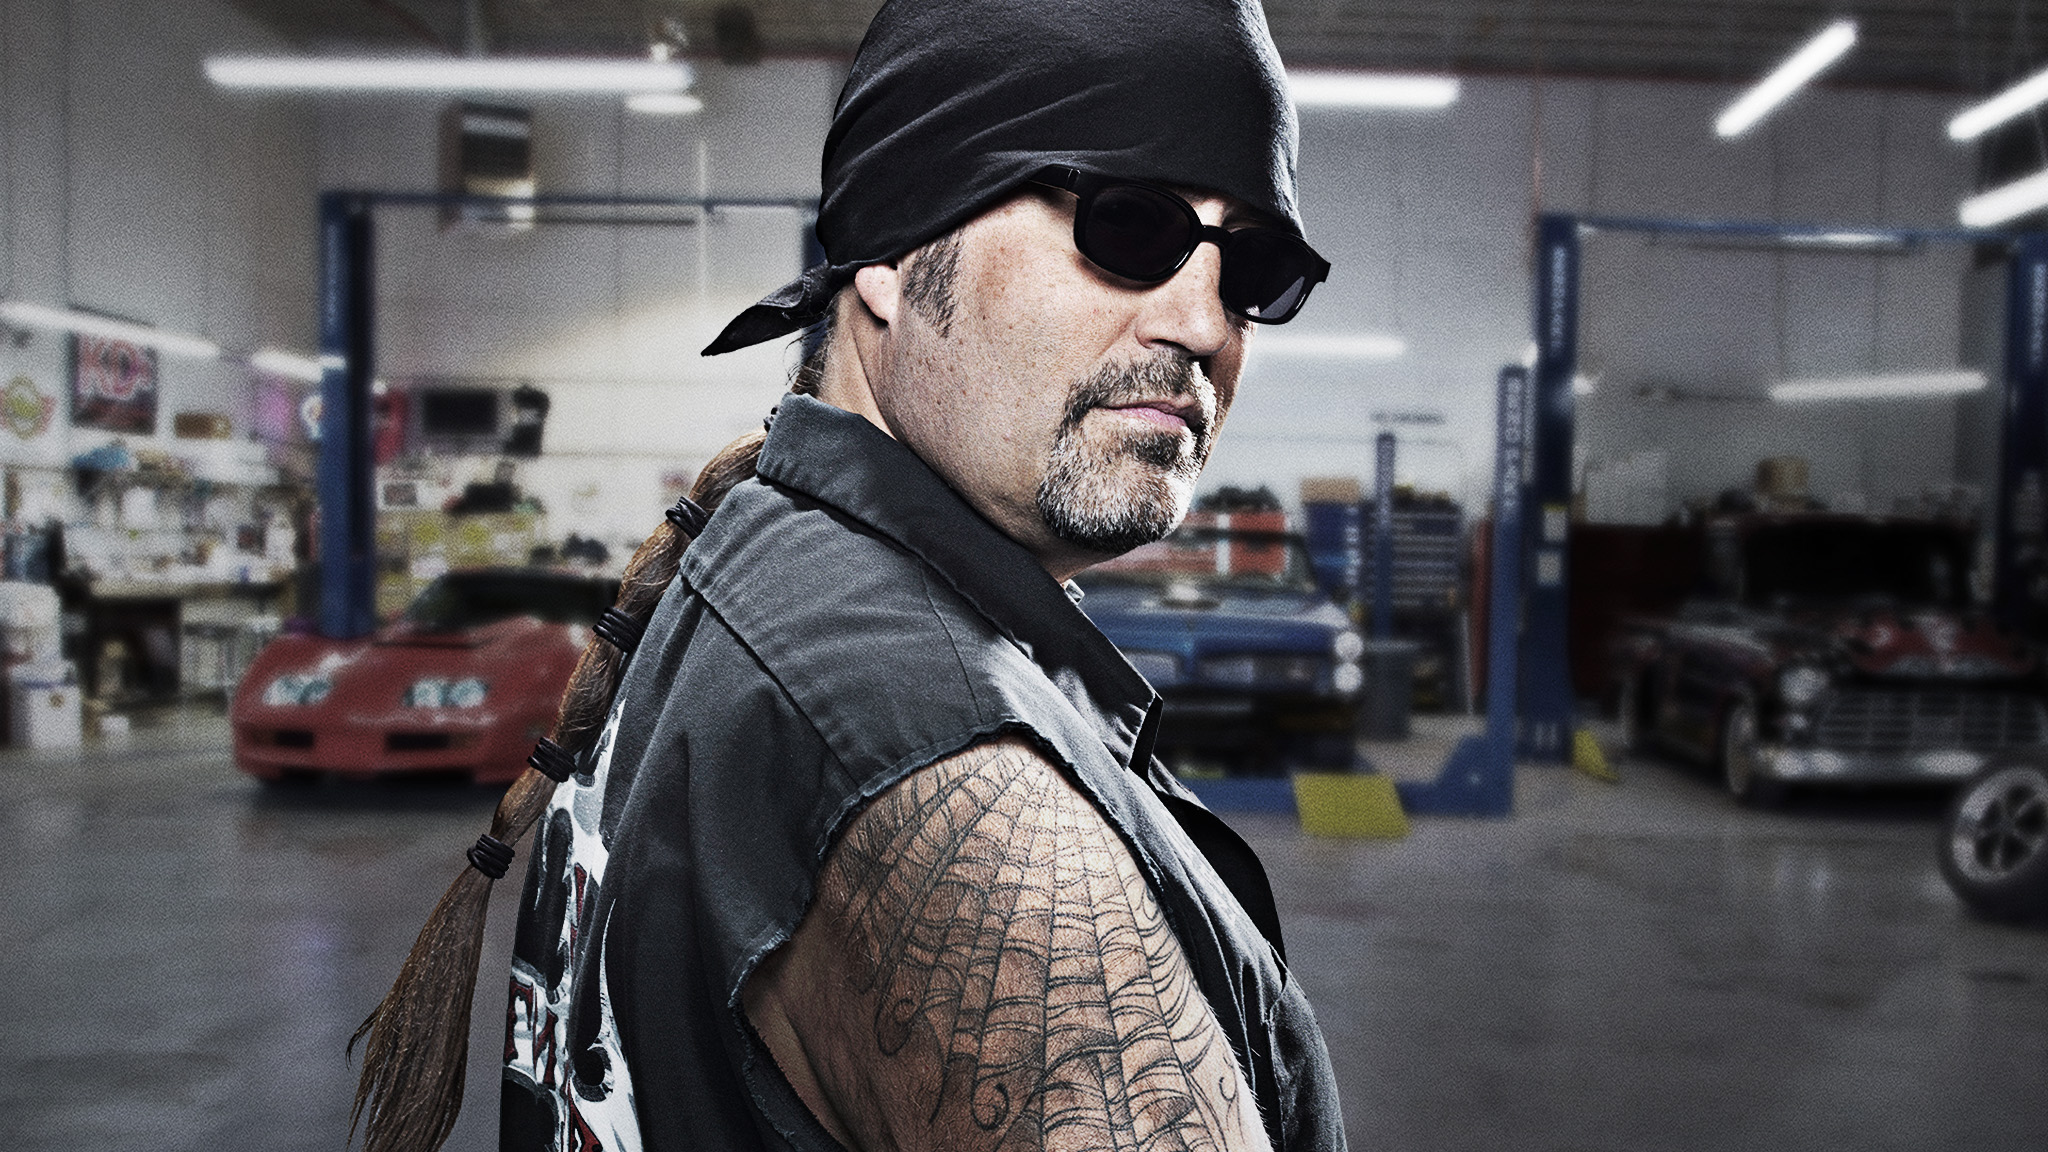 Watch Full Episodes of Counting Cars: Best Of